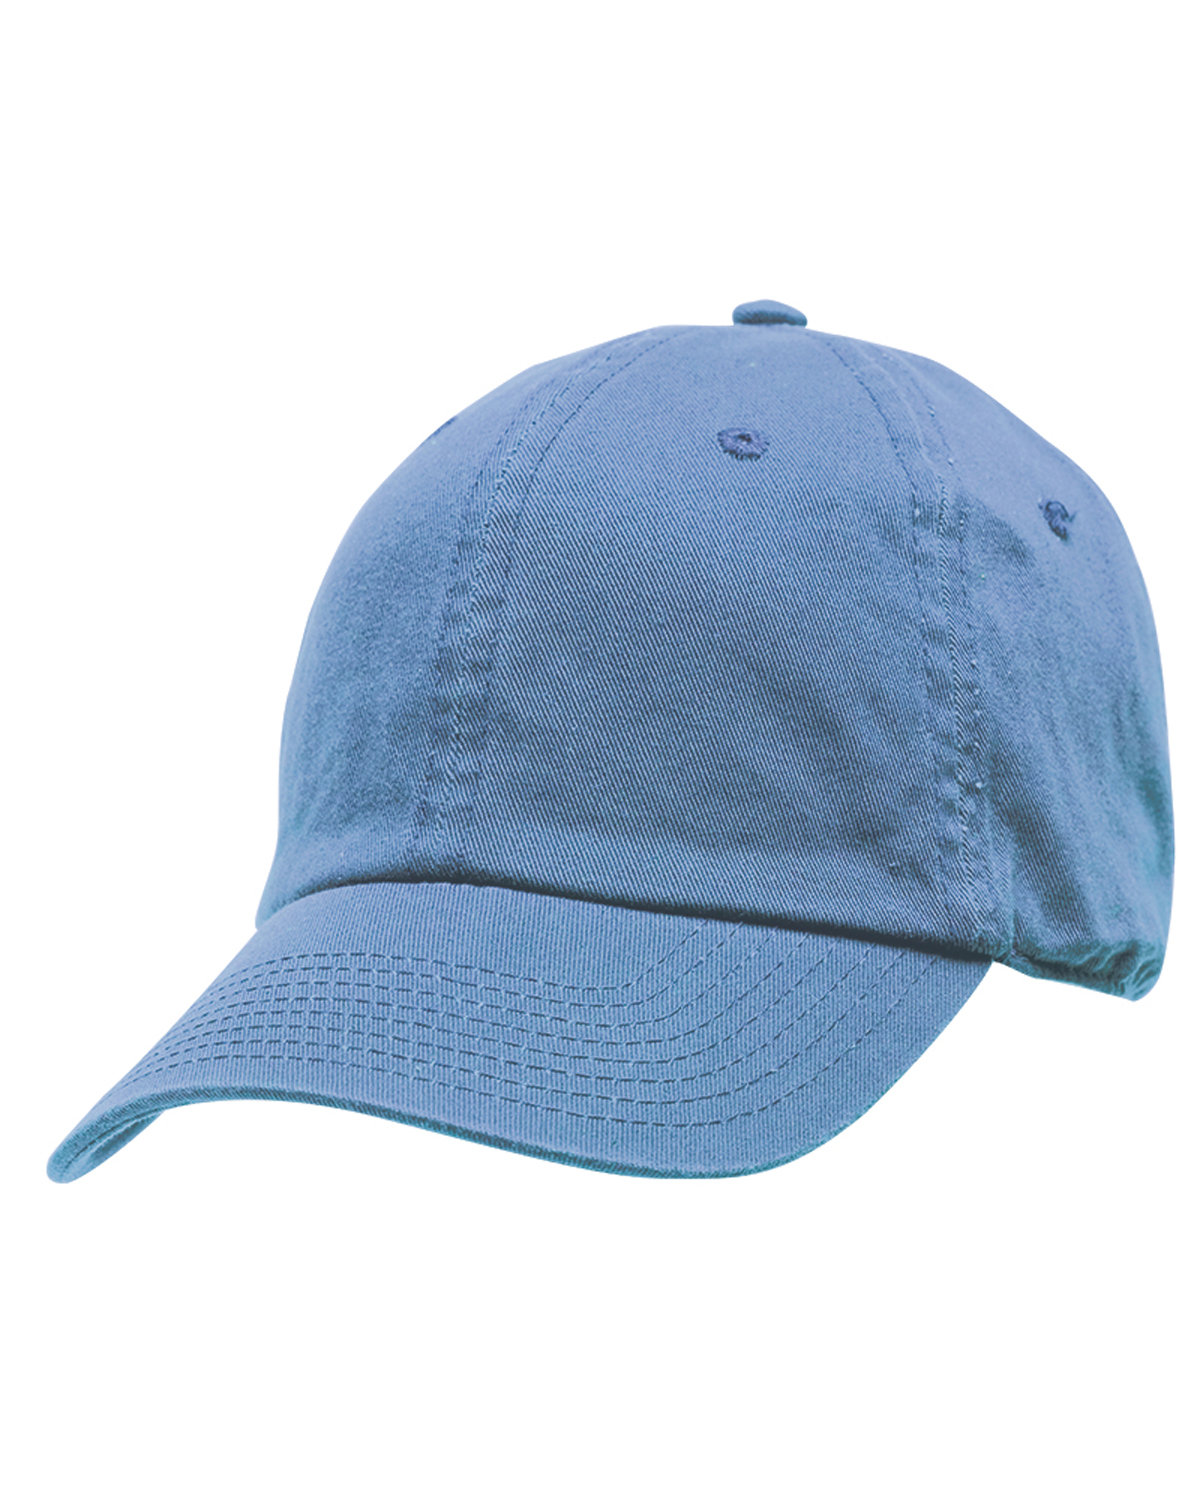 Bayside 100% Washed Chino Cotton Twill Unstructured Cap | alphabroder